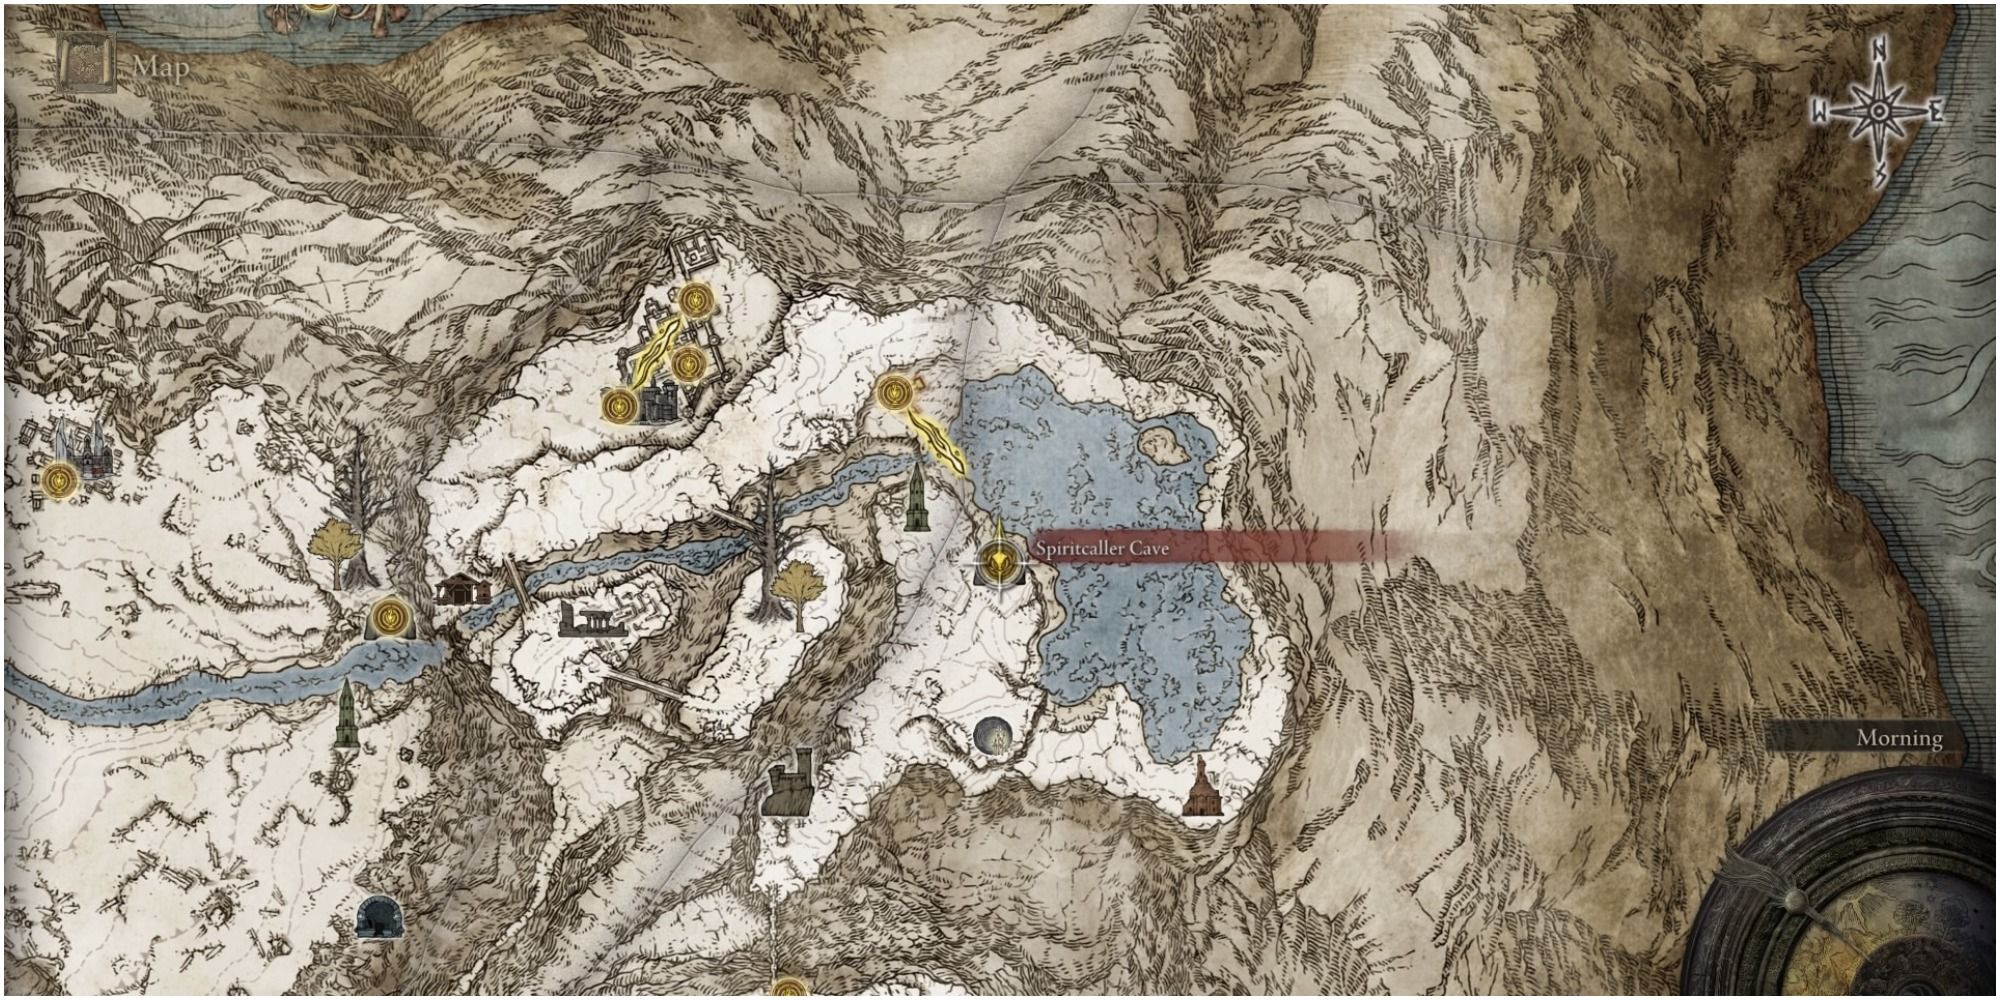 The map showing the location of Spiritcaller Cave.